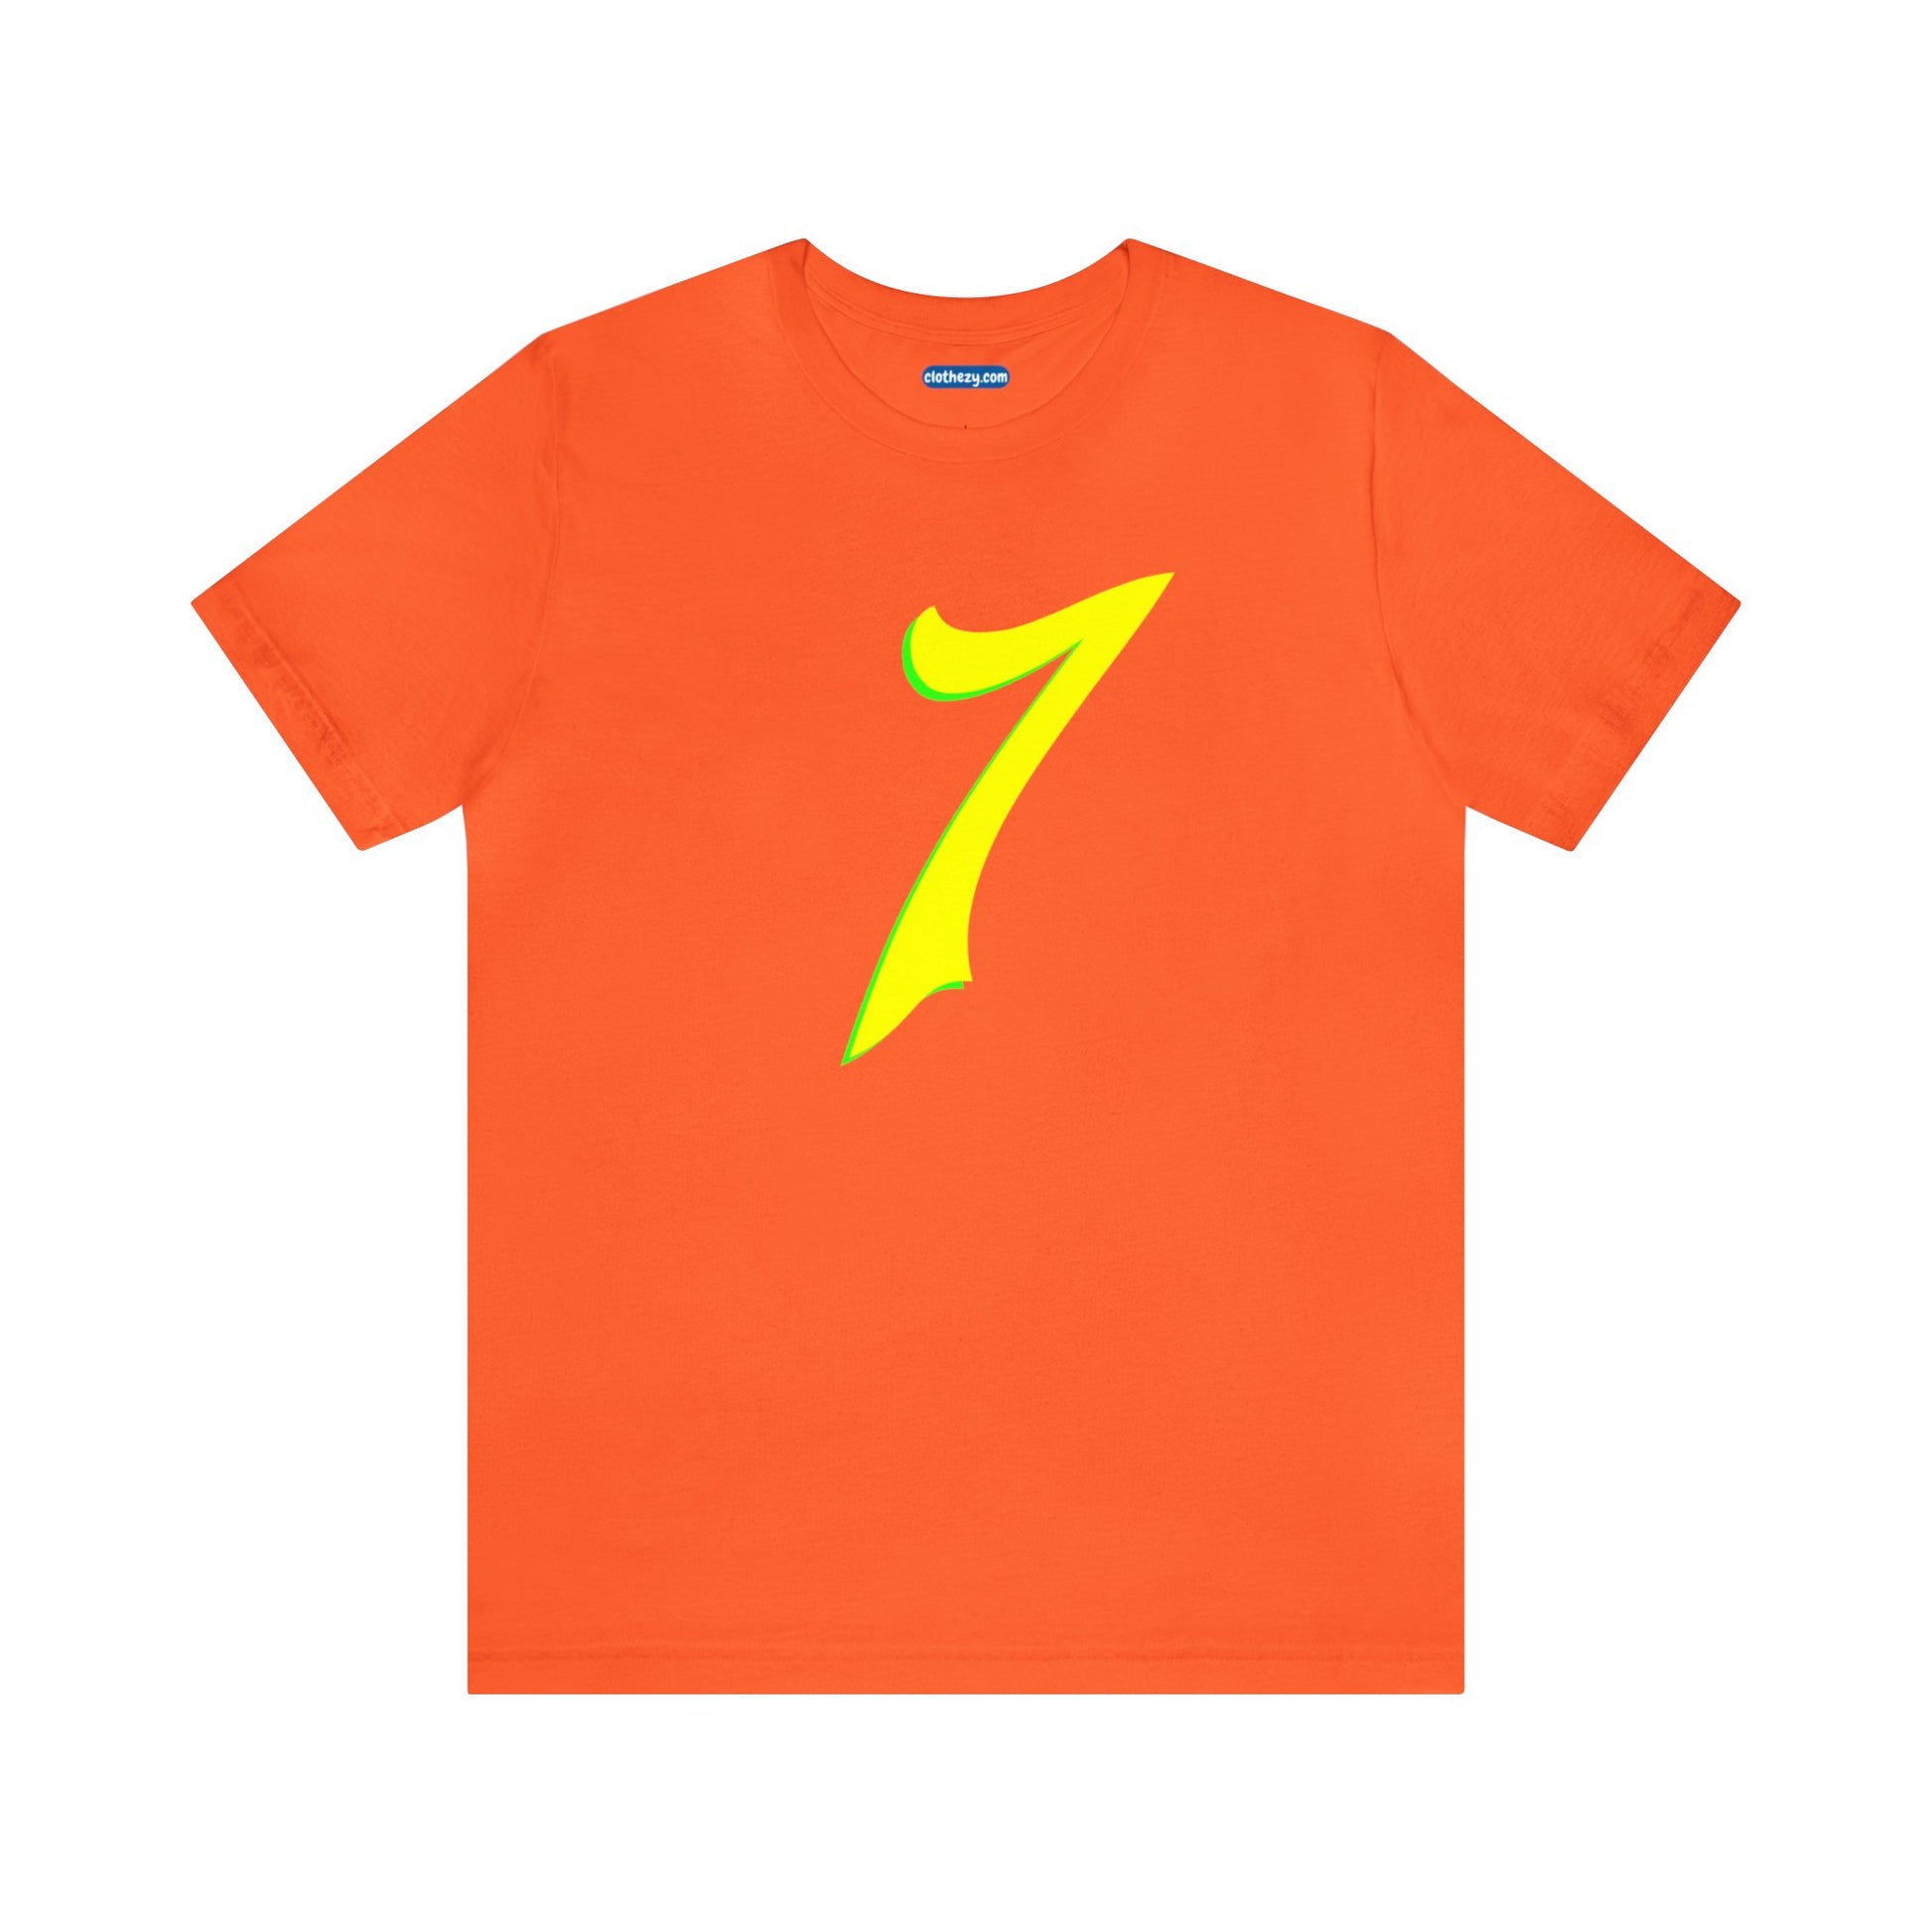 Number 7 Design - Soft Cotton Tee for birthdays and celebrations, Gift for friends and family, Multiple Options by clothezy.com in Orange Size Small - Buy Now